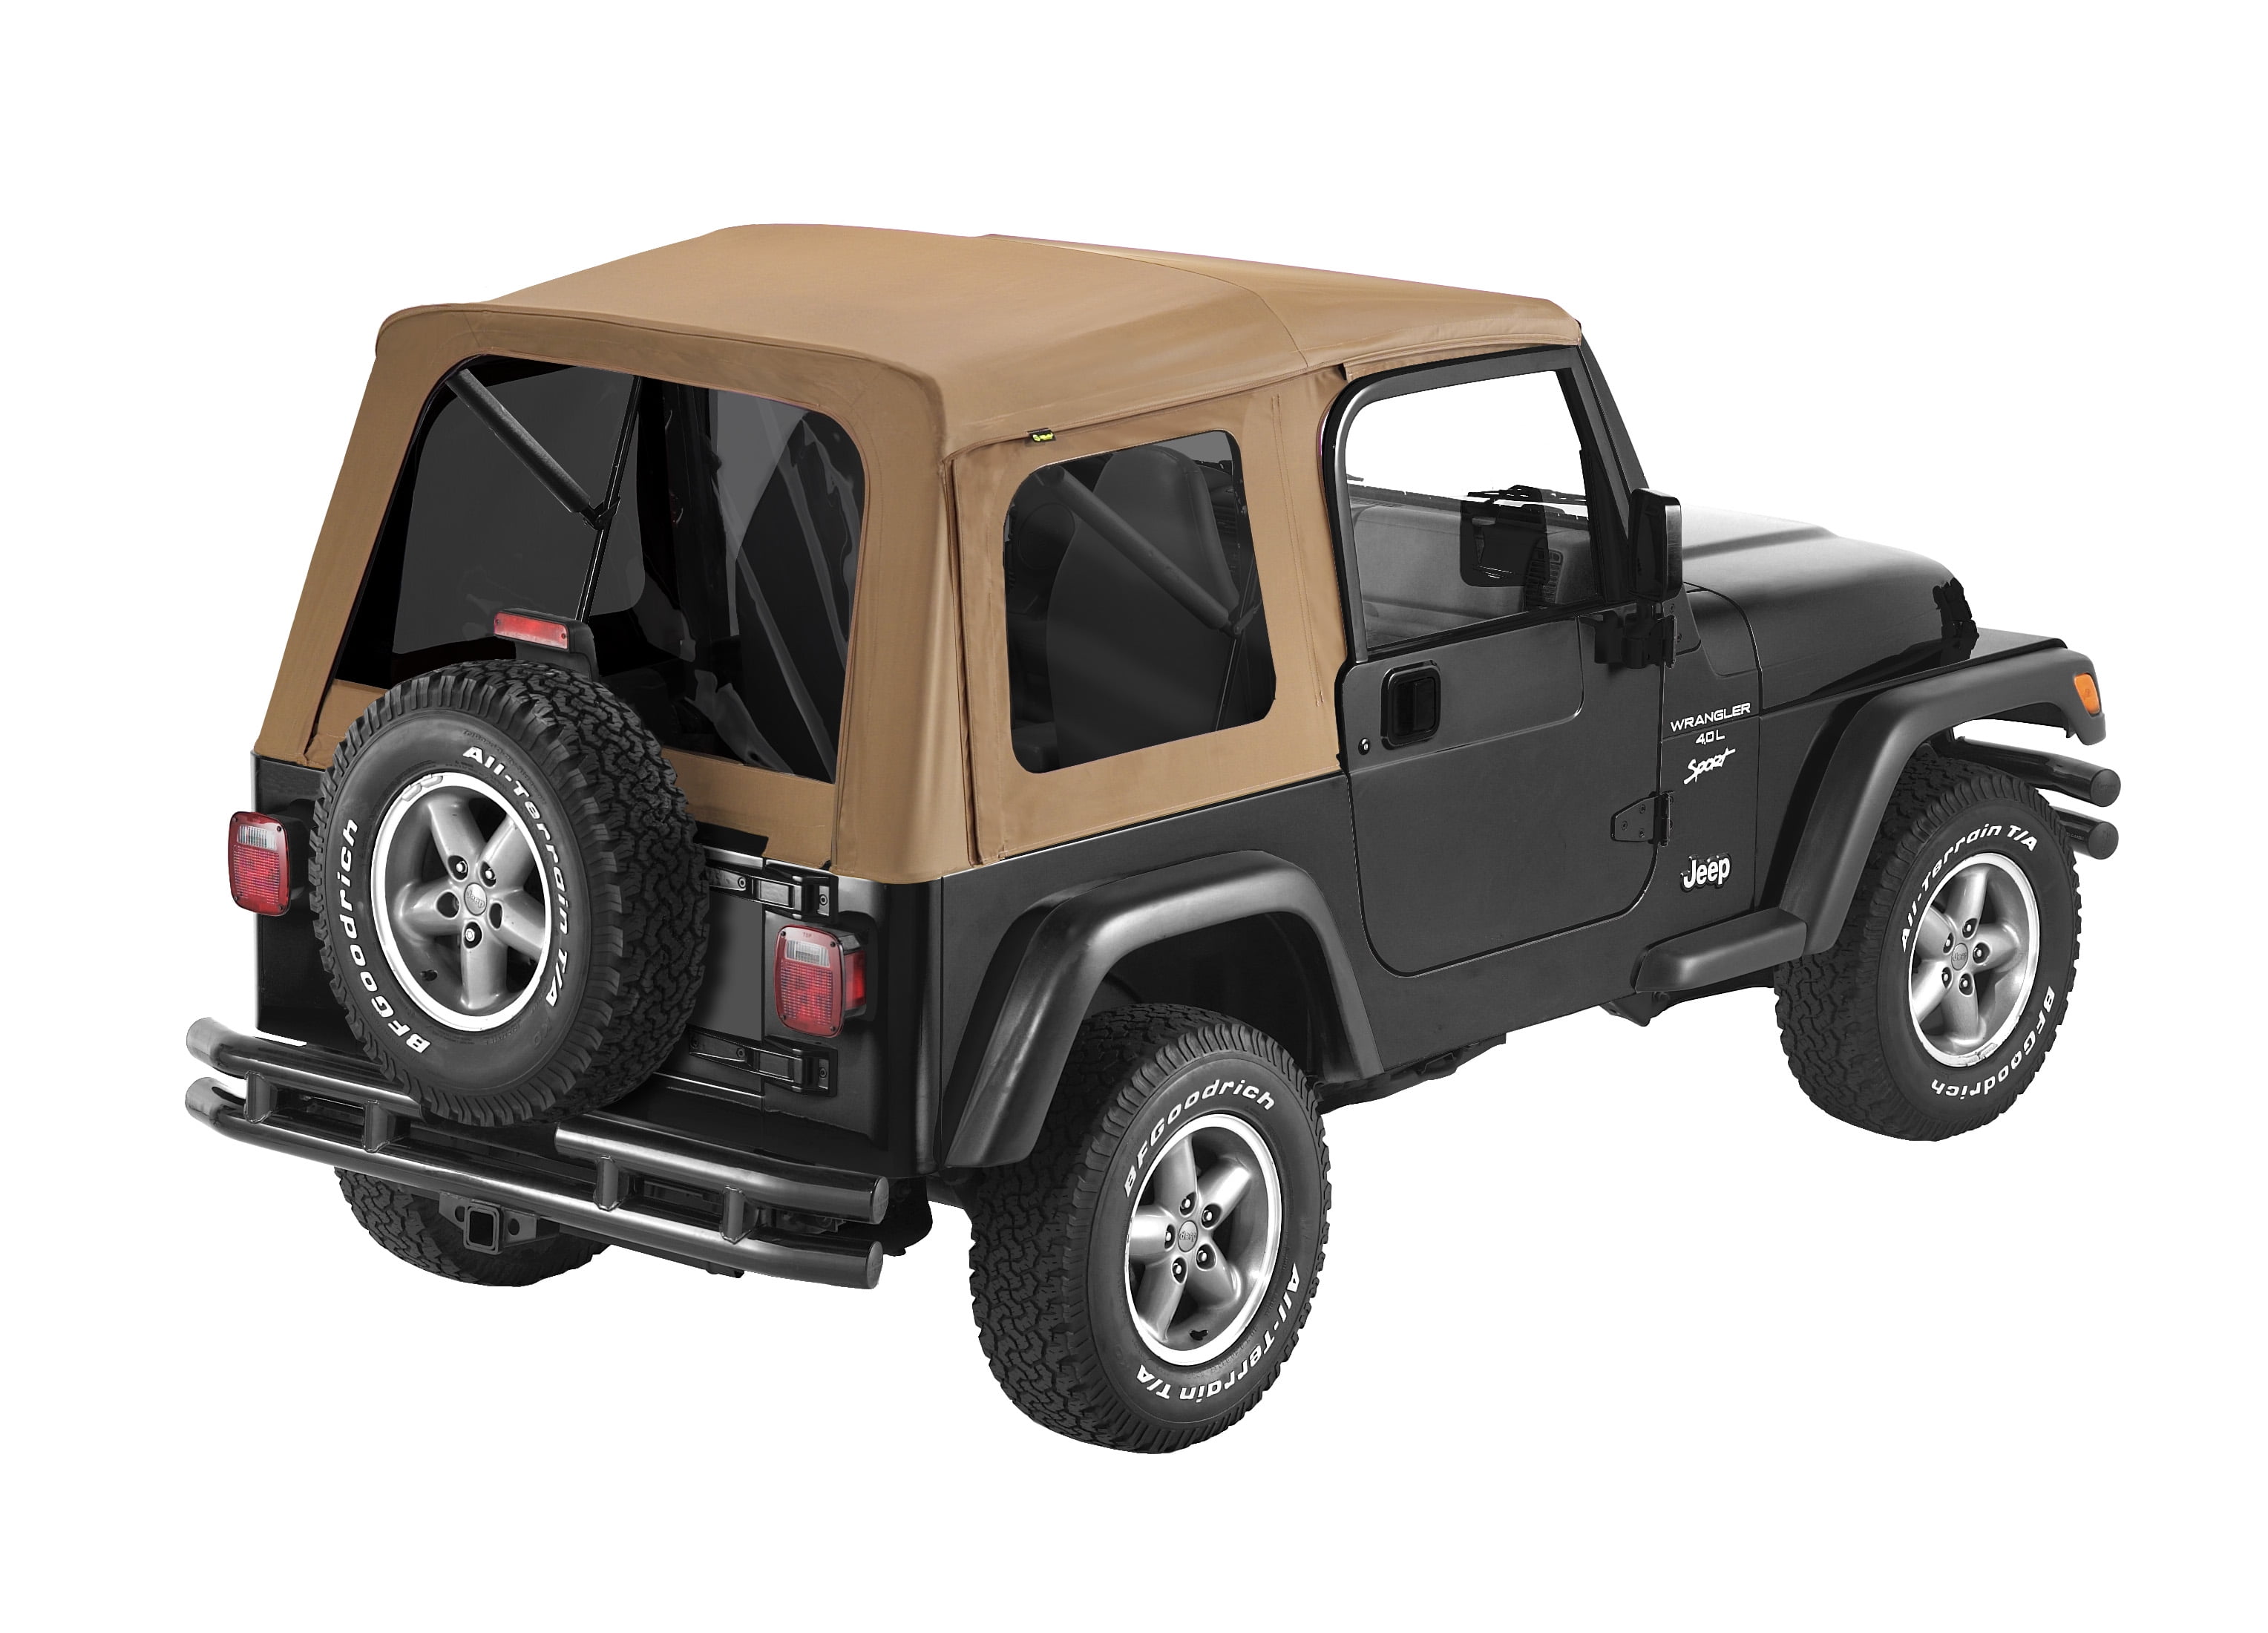 Bestop 54709-37 Jeep Wrangler with Tinted Windows Supertop Replacement Top,  Spice Fits select: 1997-2006 JEEP WRANGLER / TJ